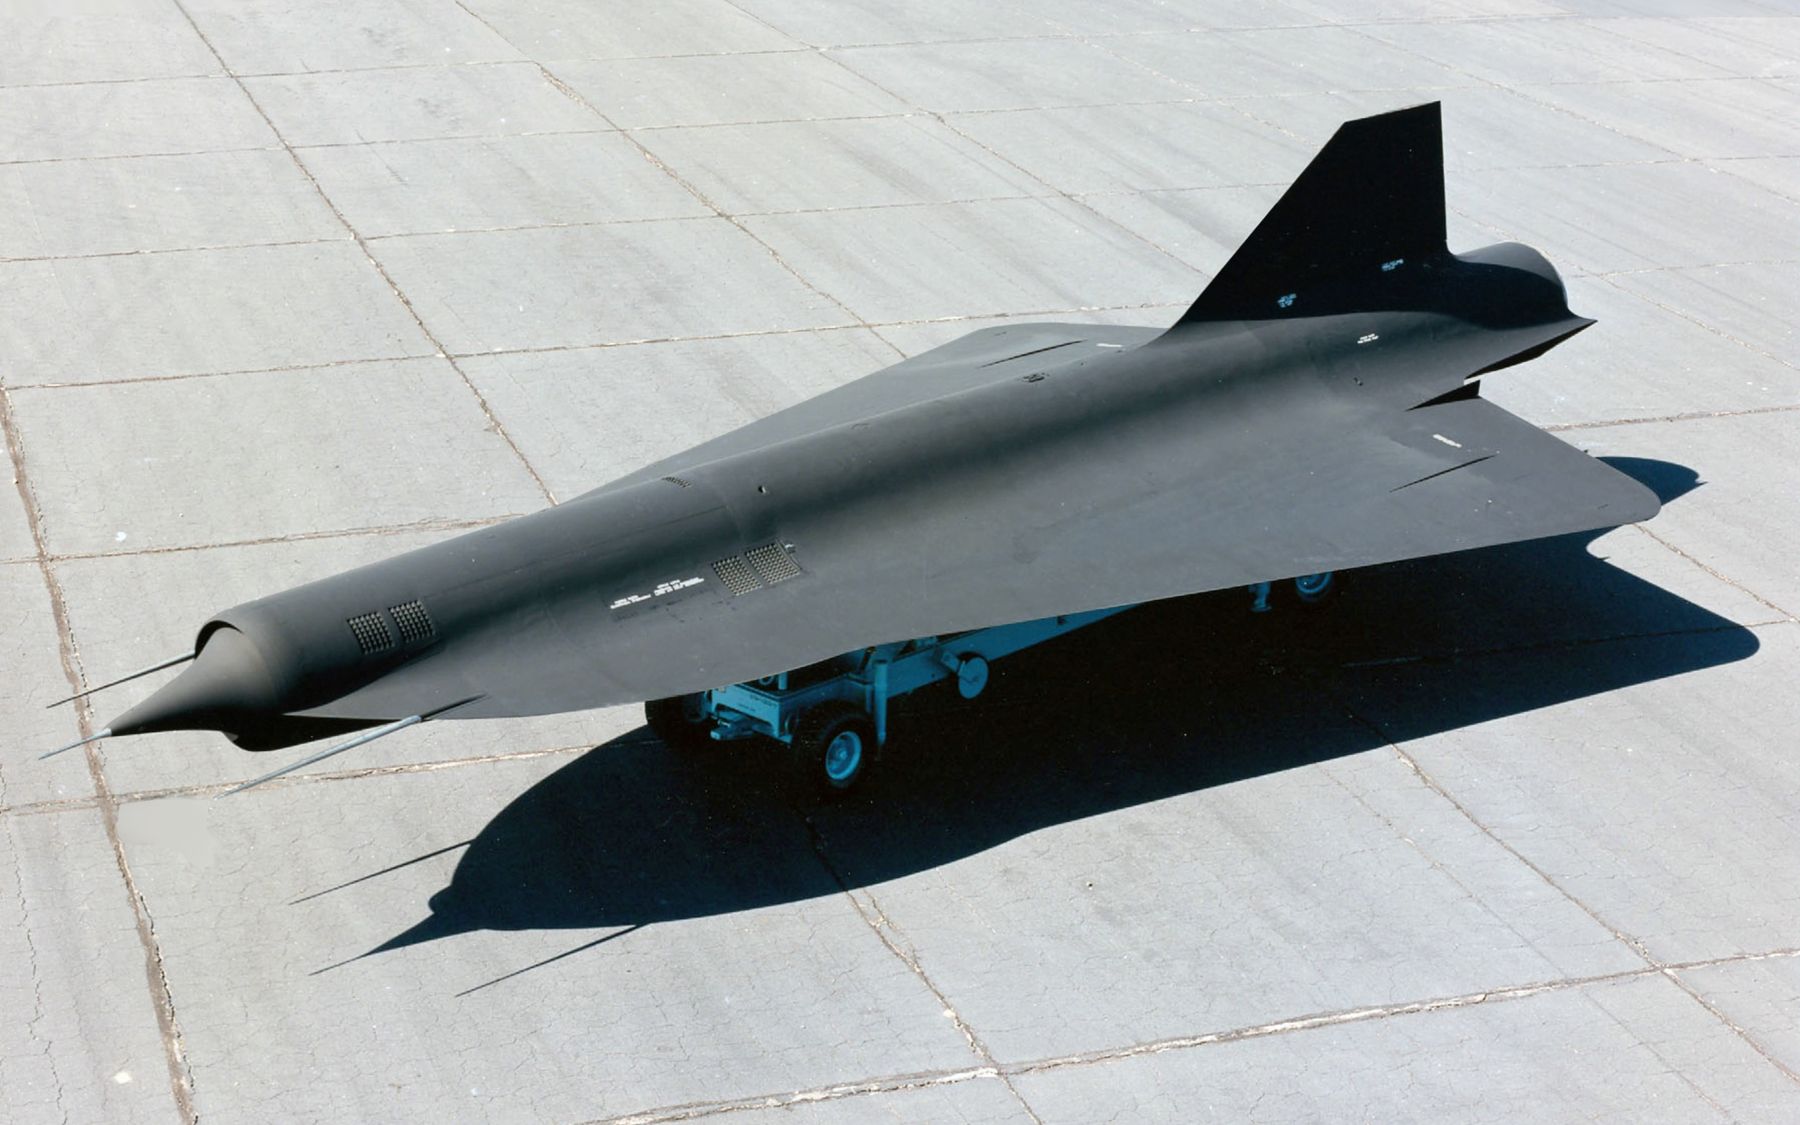 How Russia Got Its Hands on a 'Mini SR-71' Mach 3 Spy Drone (And Stole Its Secrets)